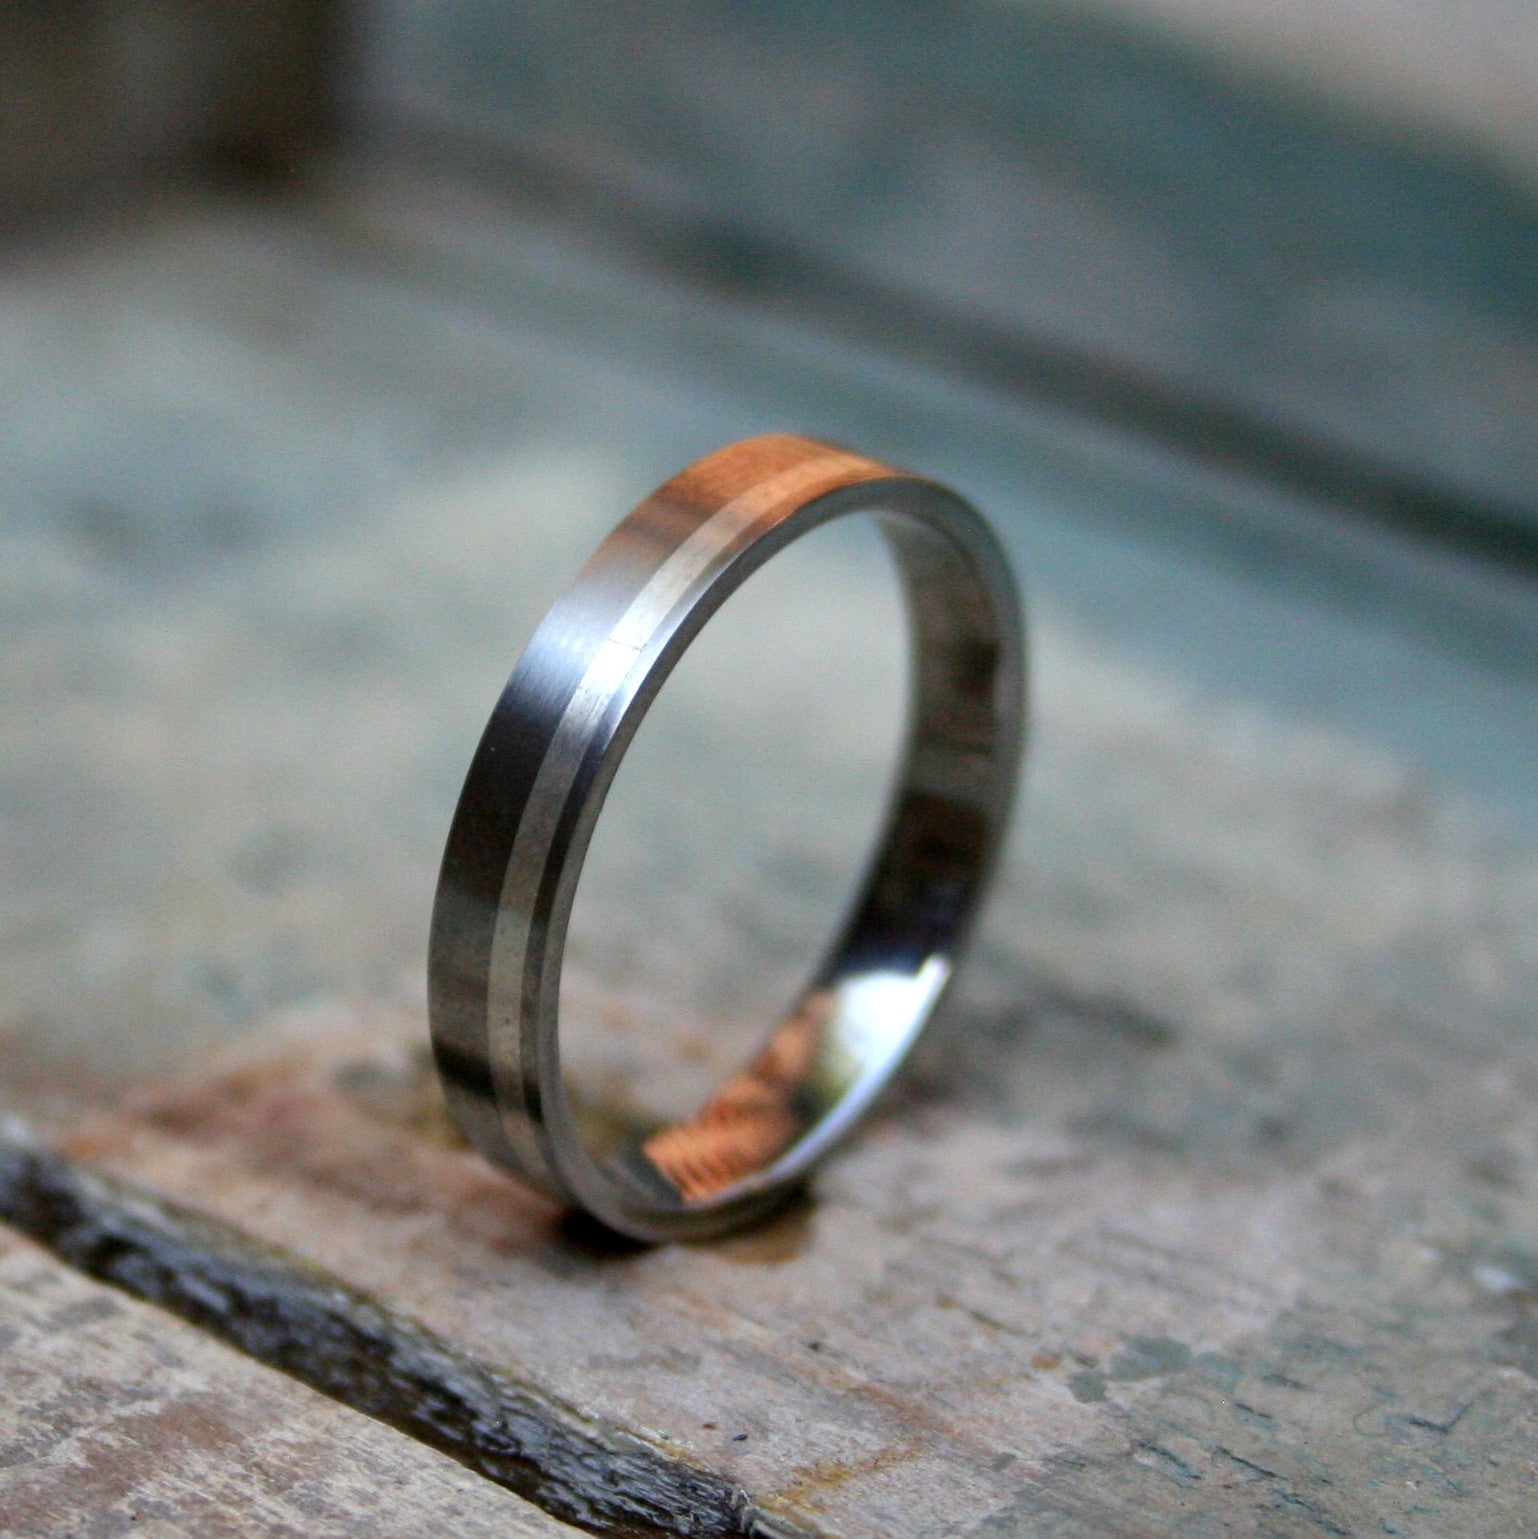 4mm Titanium flat top band with a 1.5mm silver inlay to one side. The ring is made with a matt finish and a comfort fit on the inside.  As a 4mm band this ring design can work well for both the ladies and the gents.